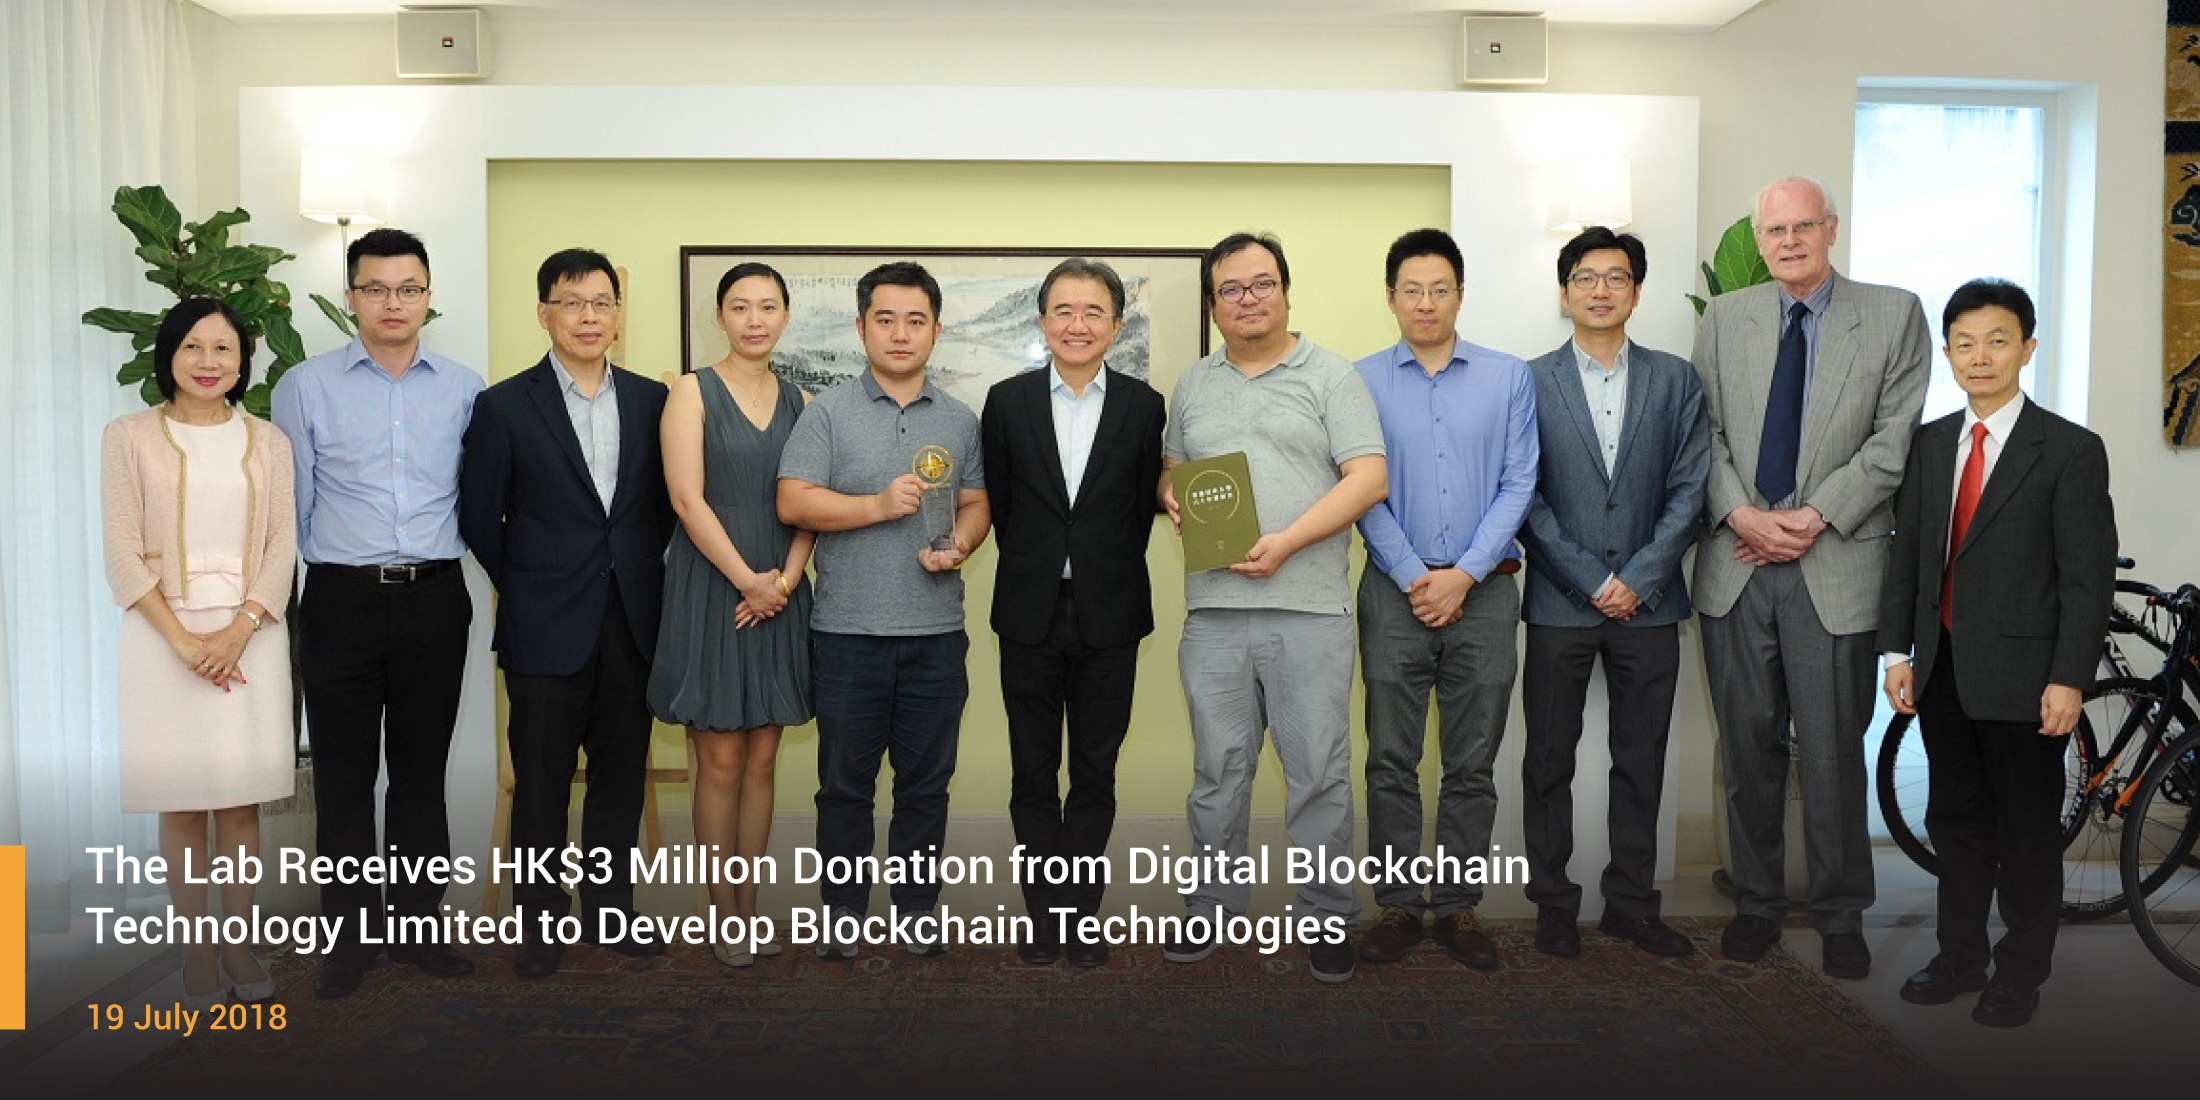 The Lab Receives HK$3 Million Donation from Digital Blockchain Technology Limited to Develop Blockchain Technologies